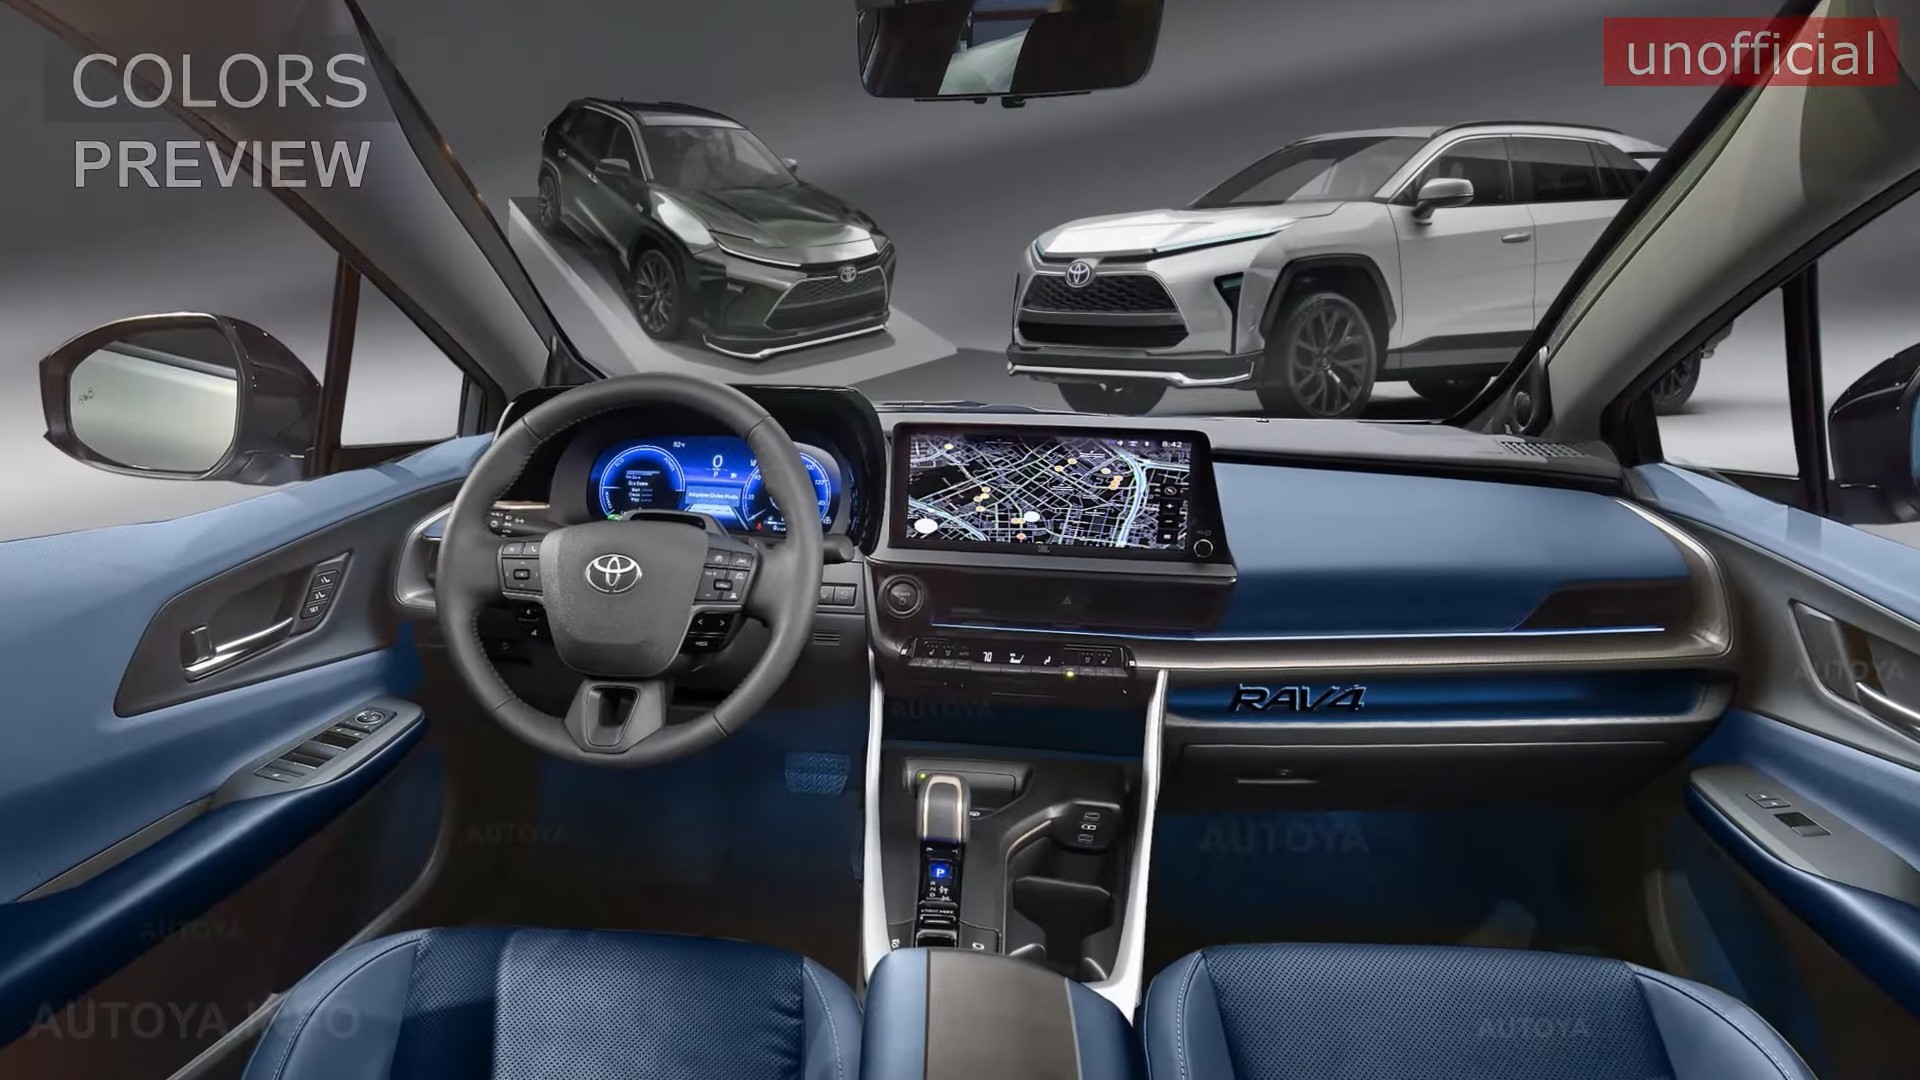 Sixth Gen 2024 Toyota RAV4 Digitally Shows Its Colorful and Techy